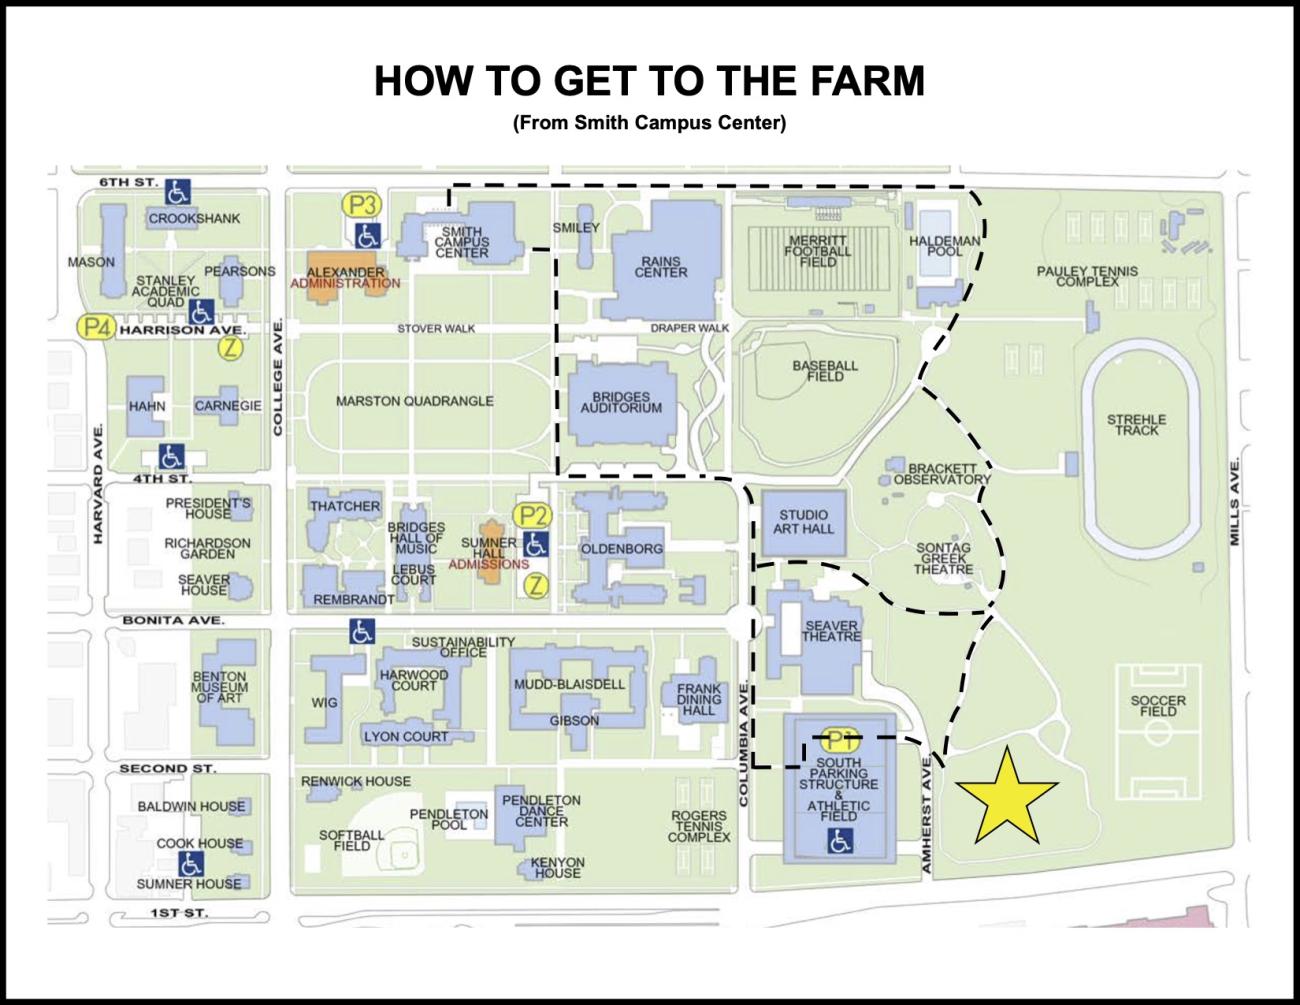 directions-to-the-farm